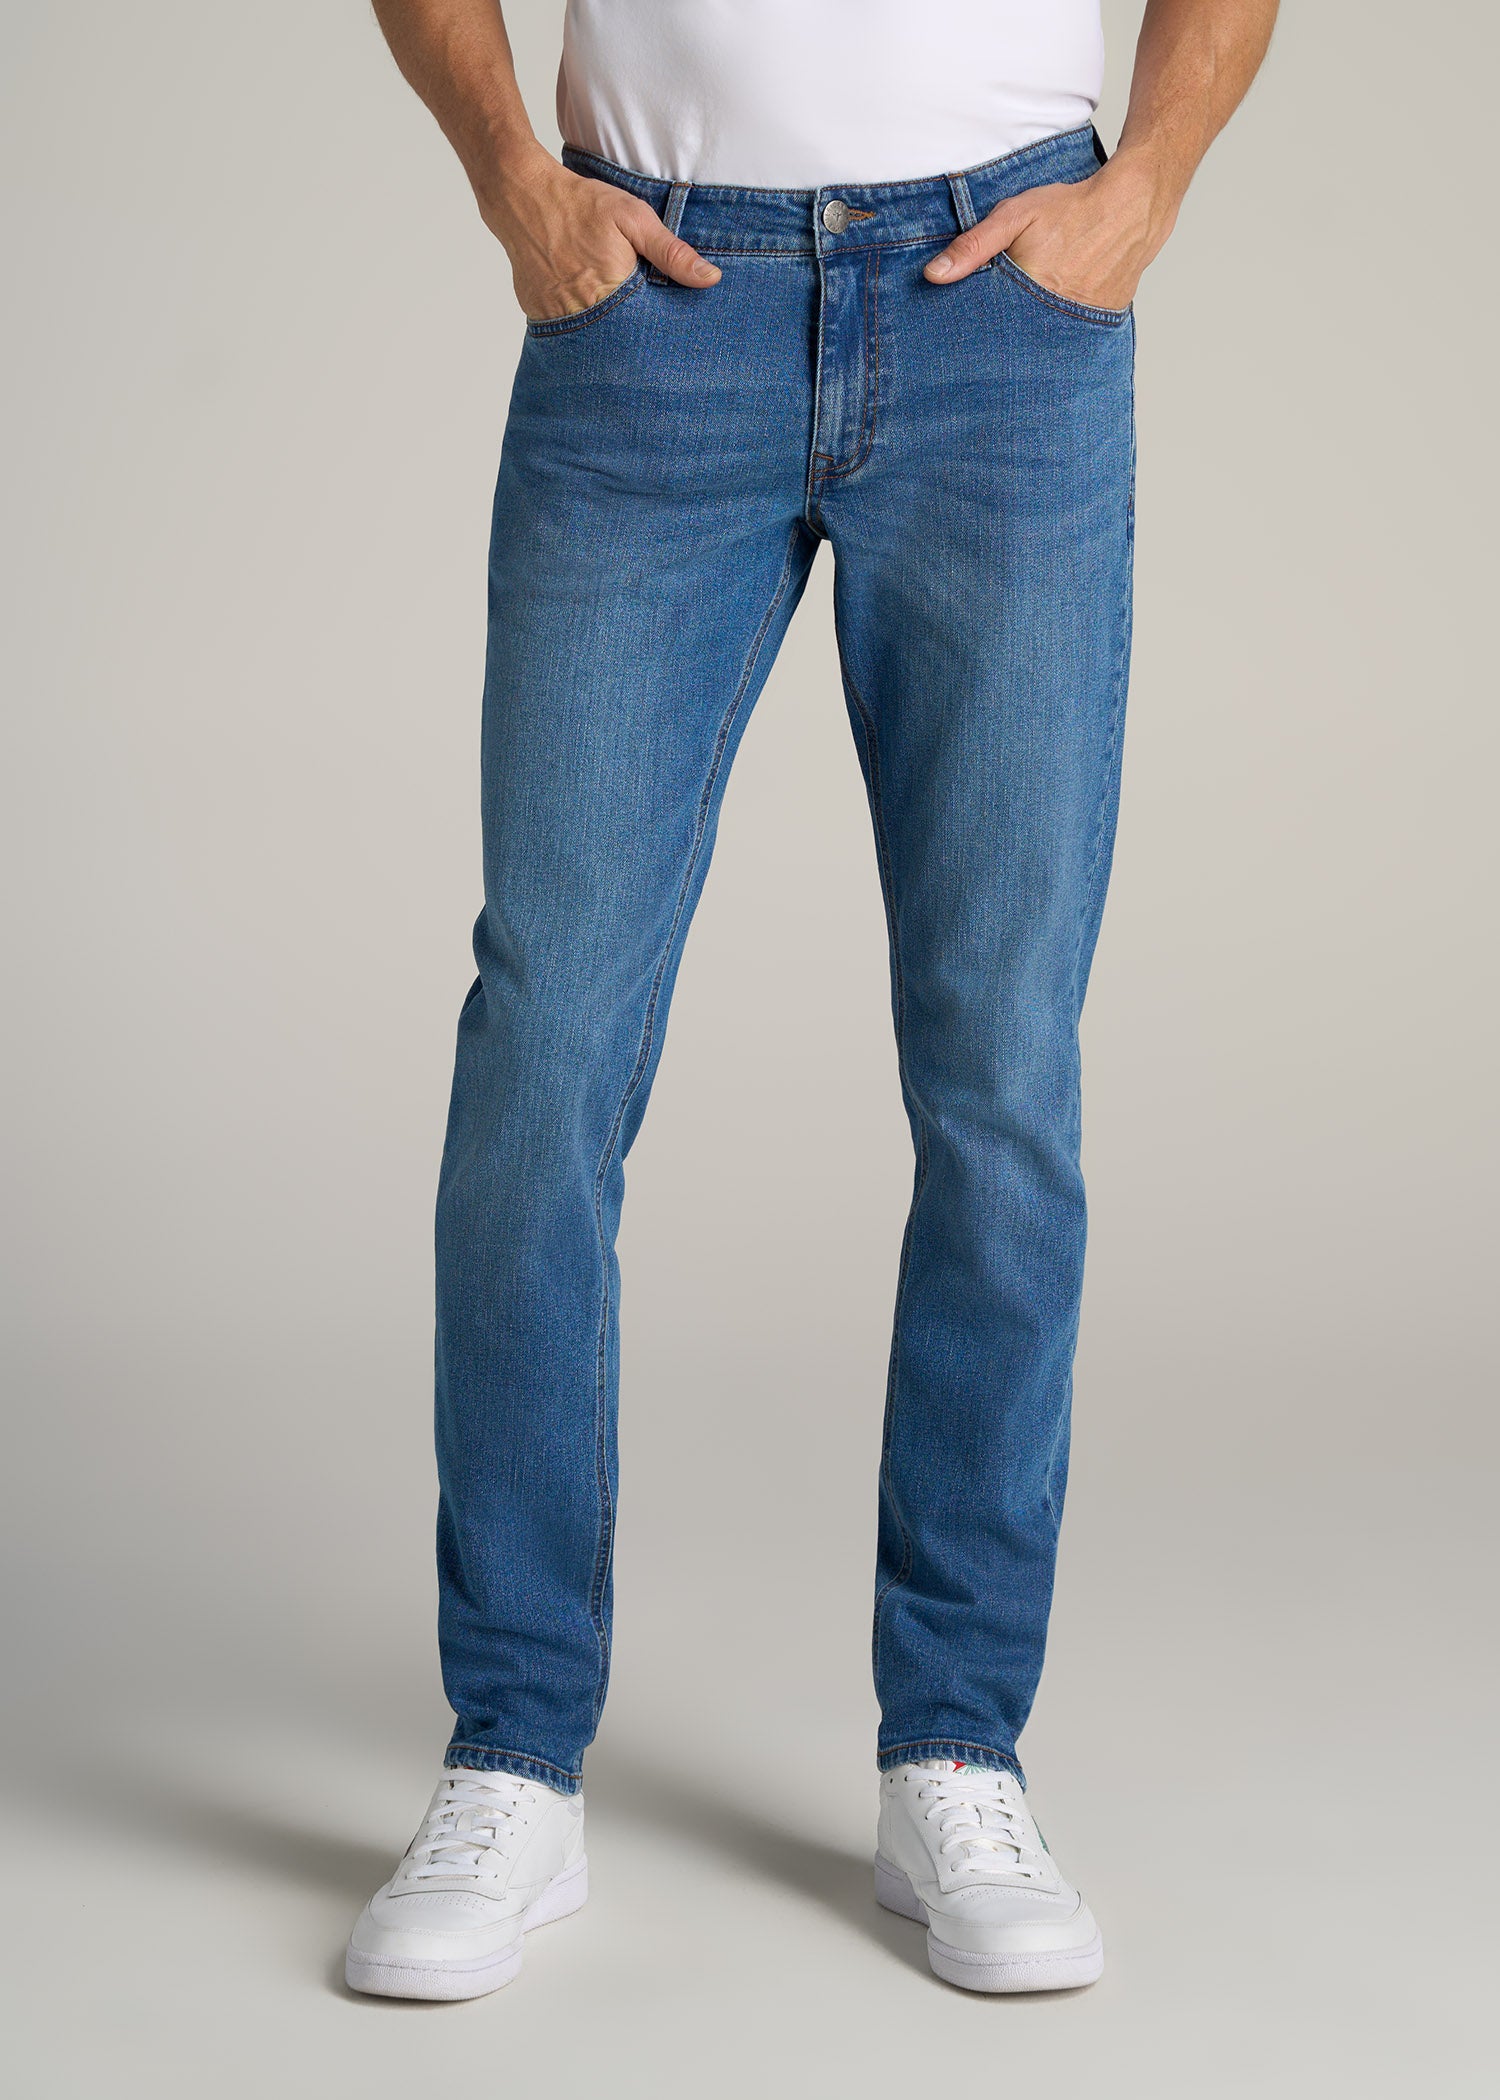 Carman TAPERED Jeans for Tall Men in Classic Mid Blue